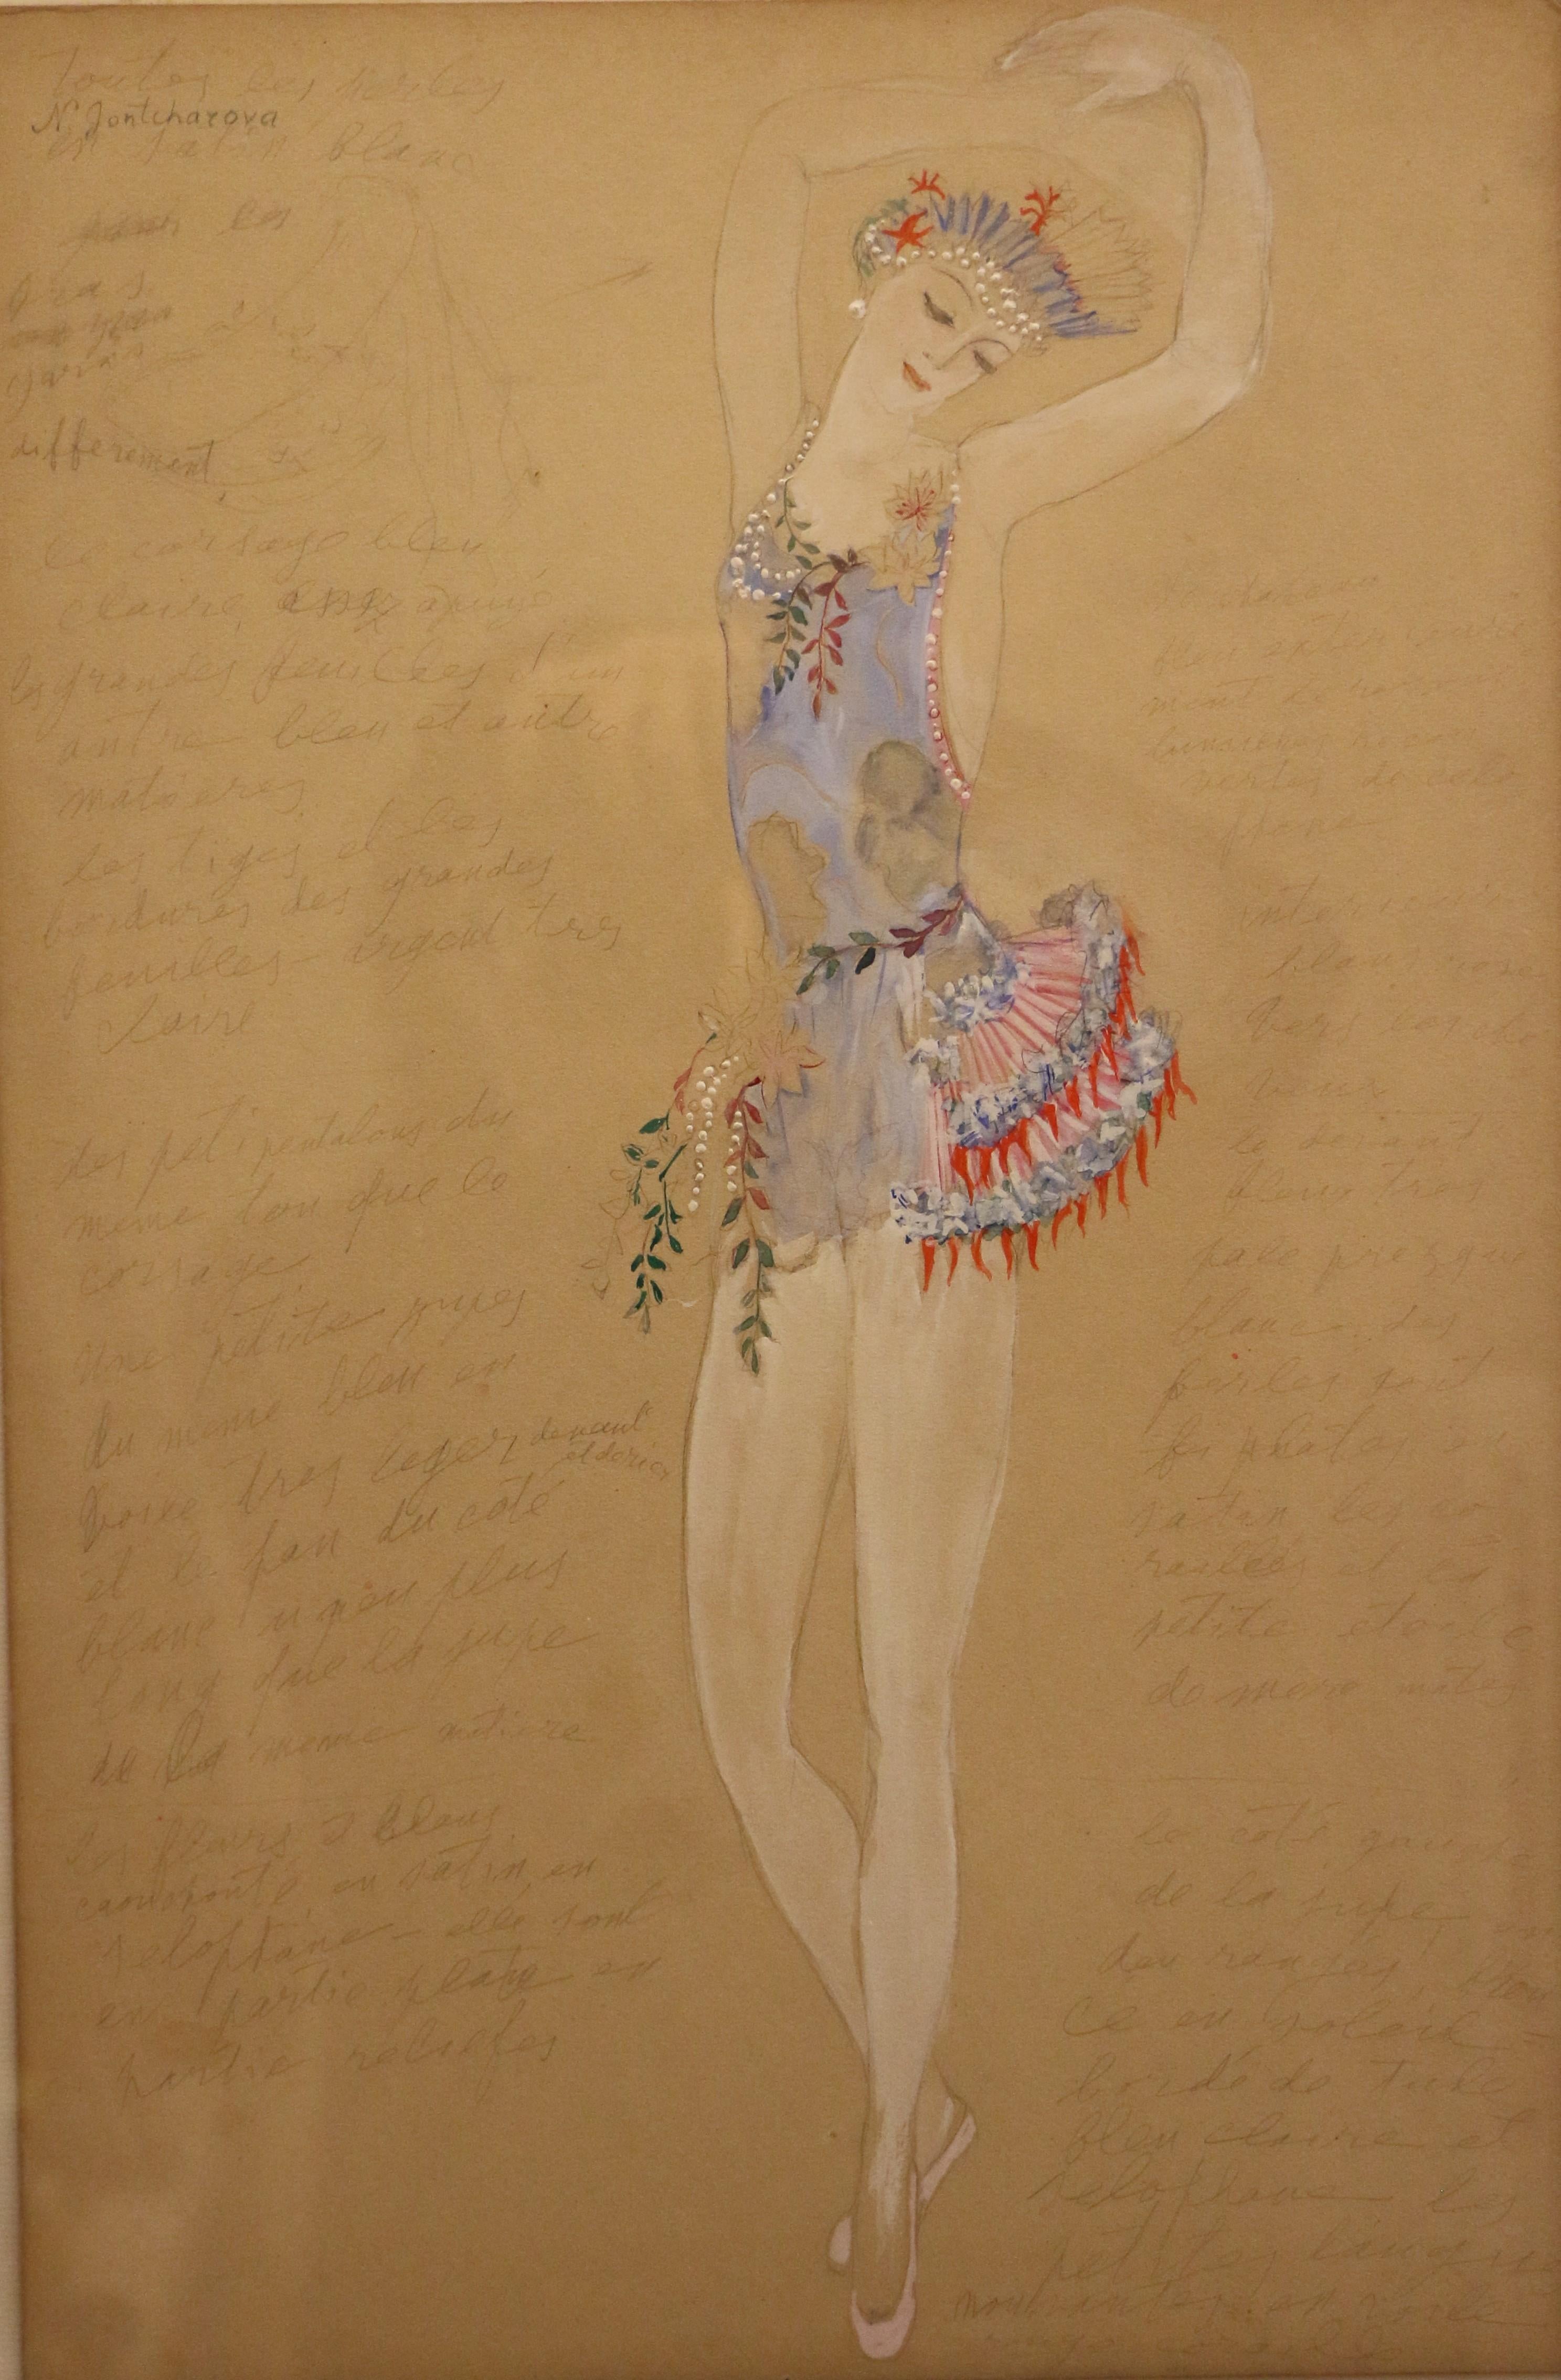 Study of a costume for a ballet dancer by Natalia Gontcharova (1881-1962).
Watercolor and pencil on light brown cardboard. Numerous annotations in French in pencil detailing materials and colors to be used e.g. 